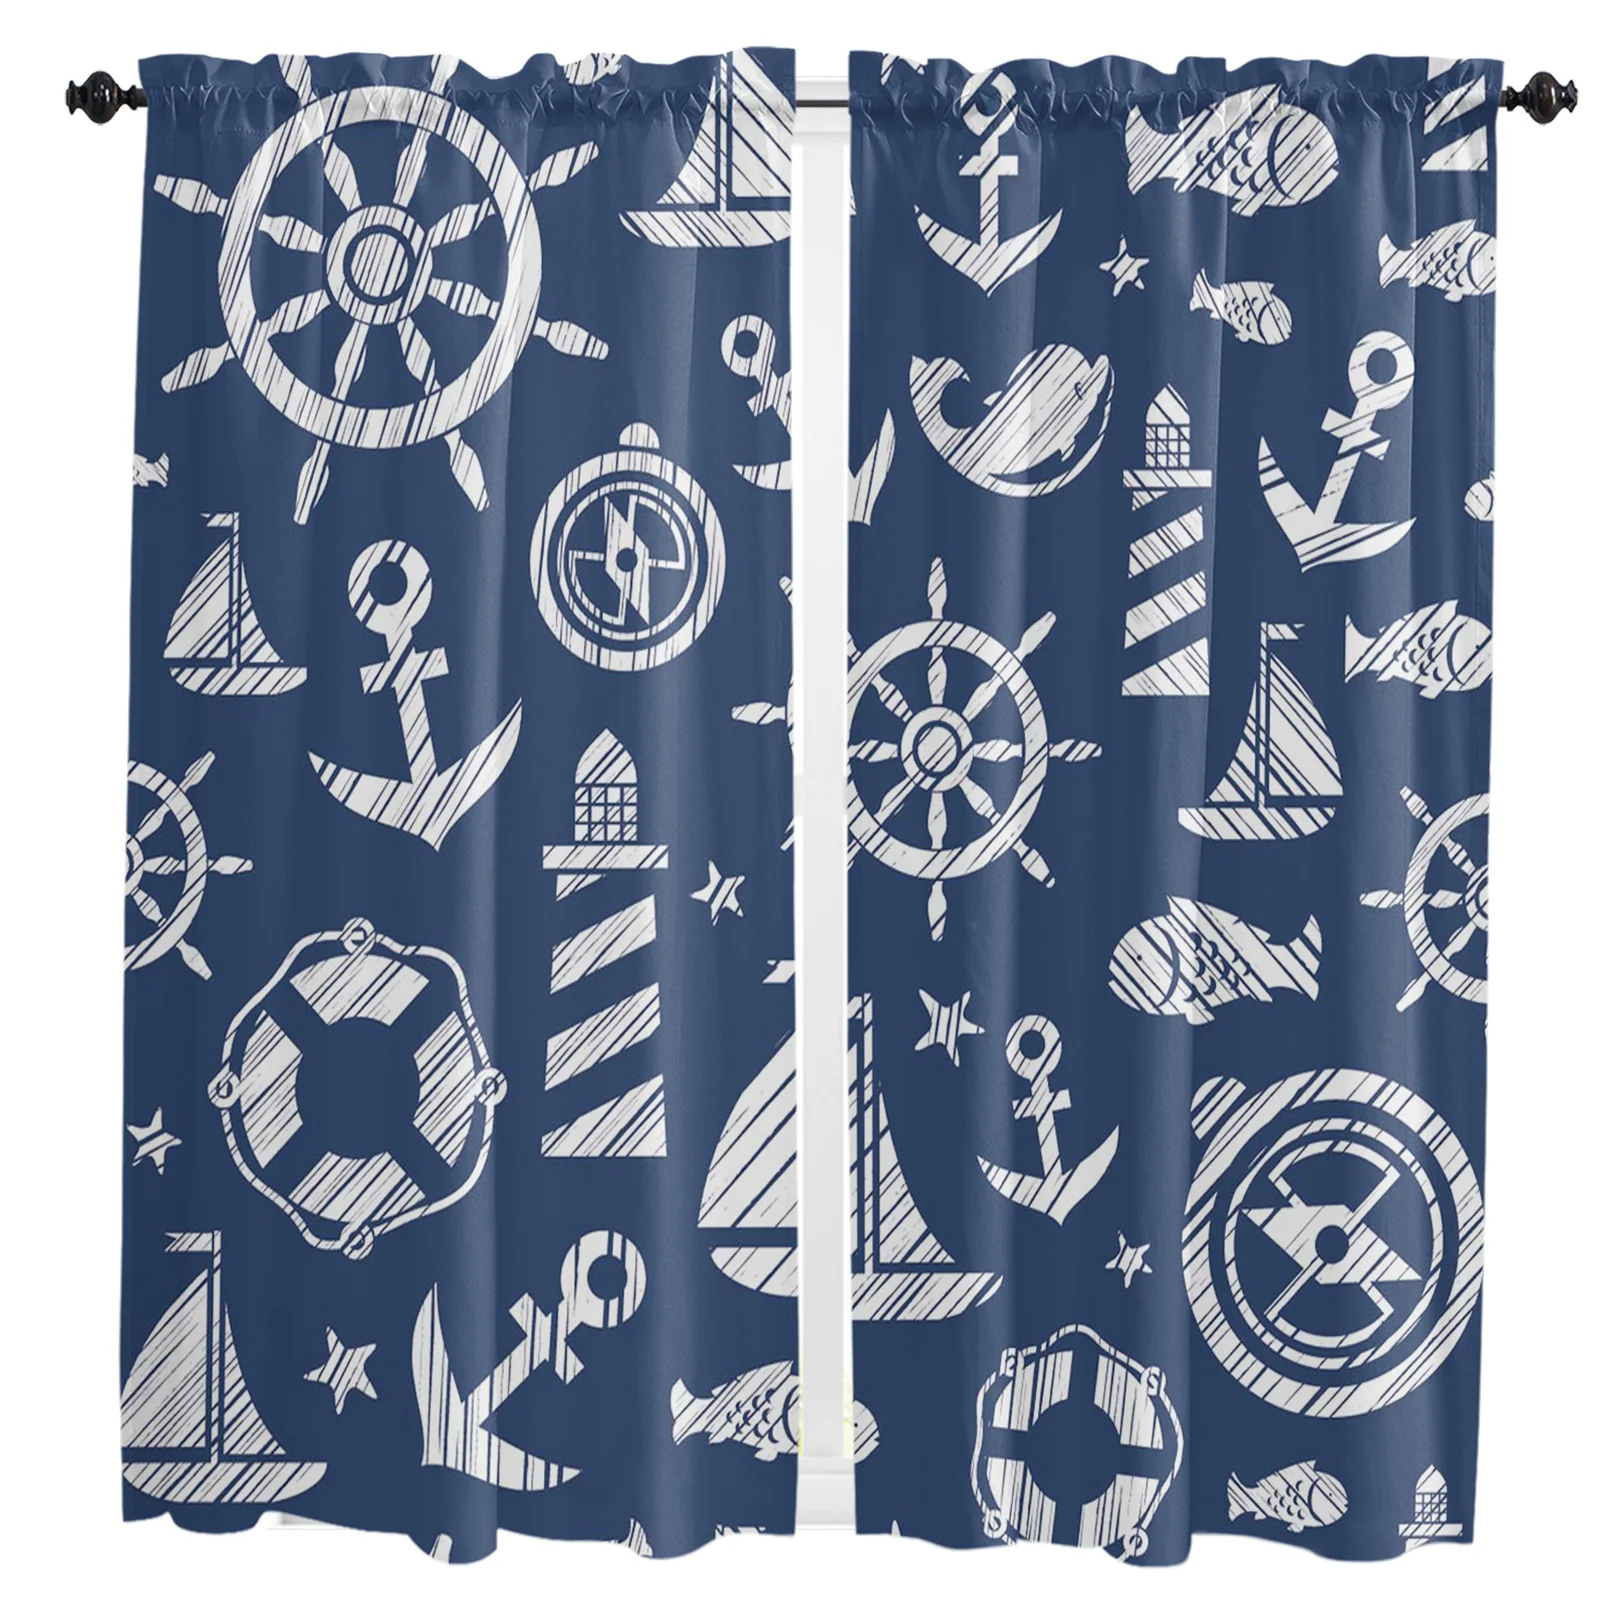 Blue Anchor Boat Fish Curtains For Living Room Kitchen Curtain Bedroom Decorative Window Treatments Home Essentials Drapes